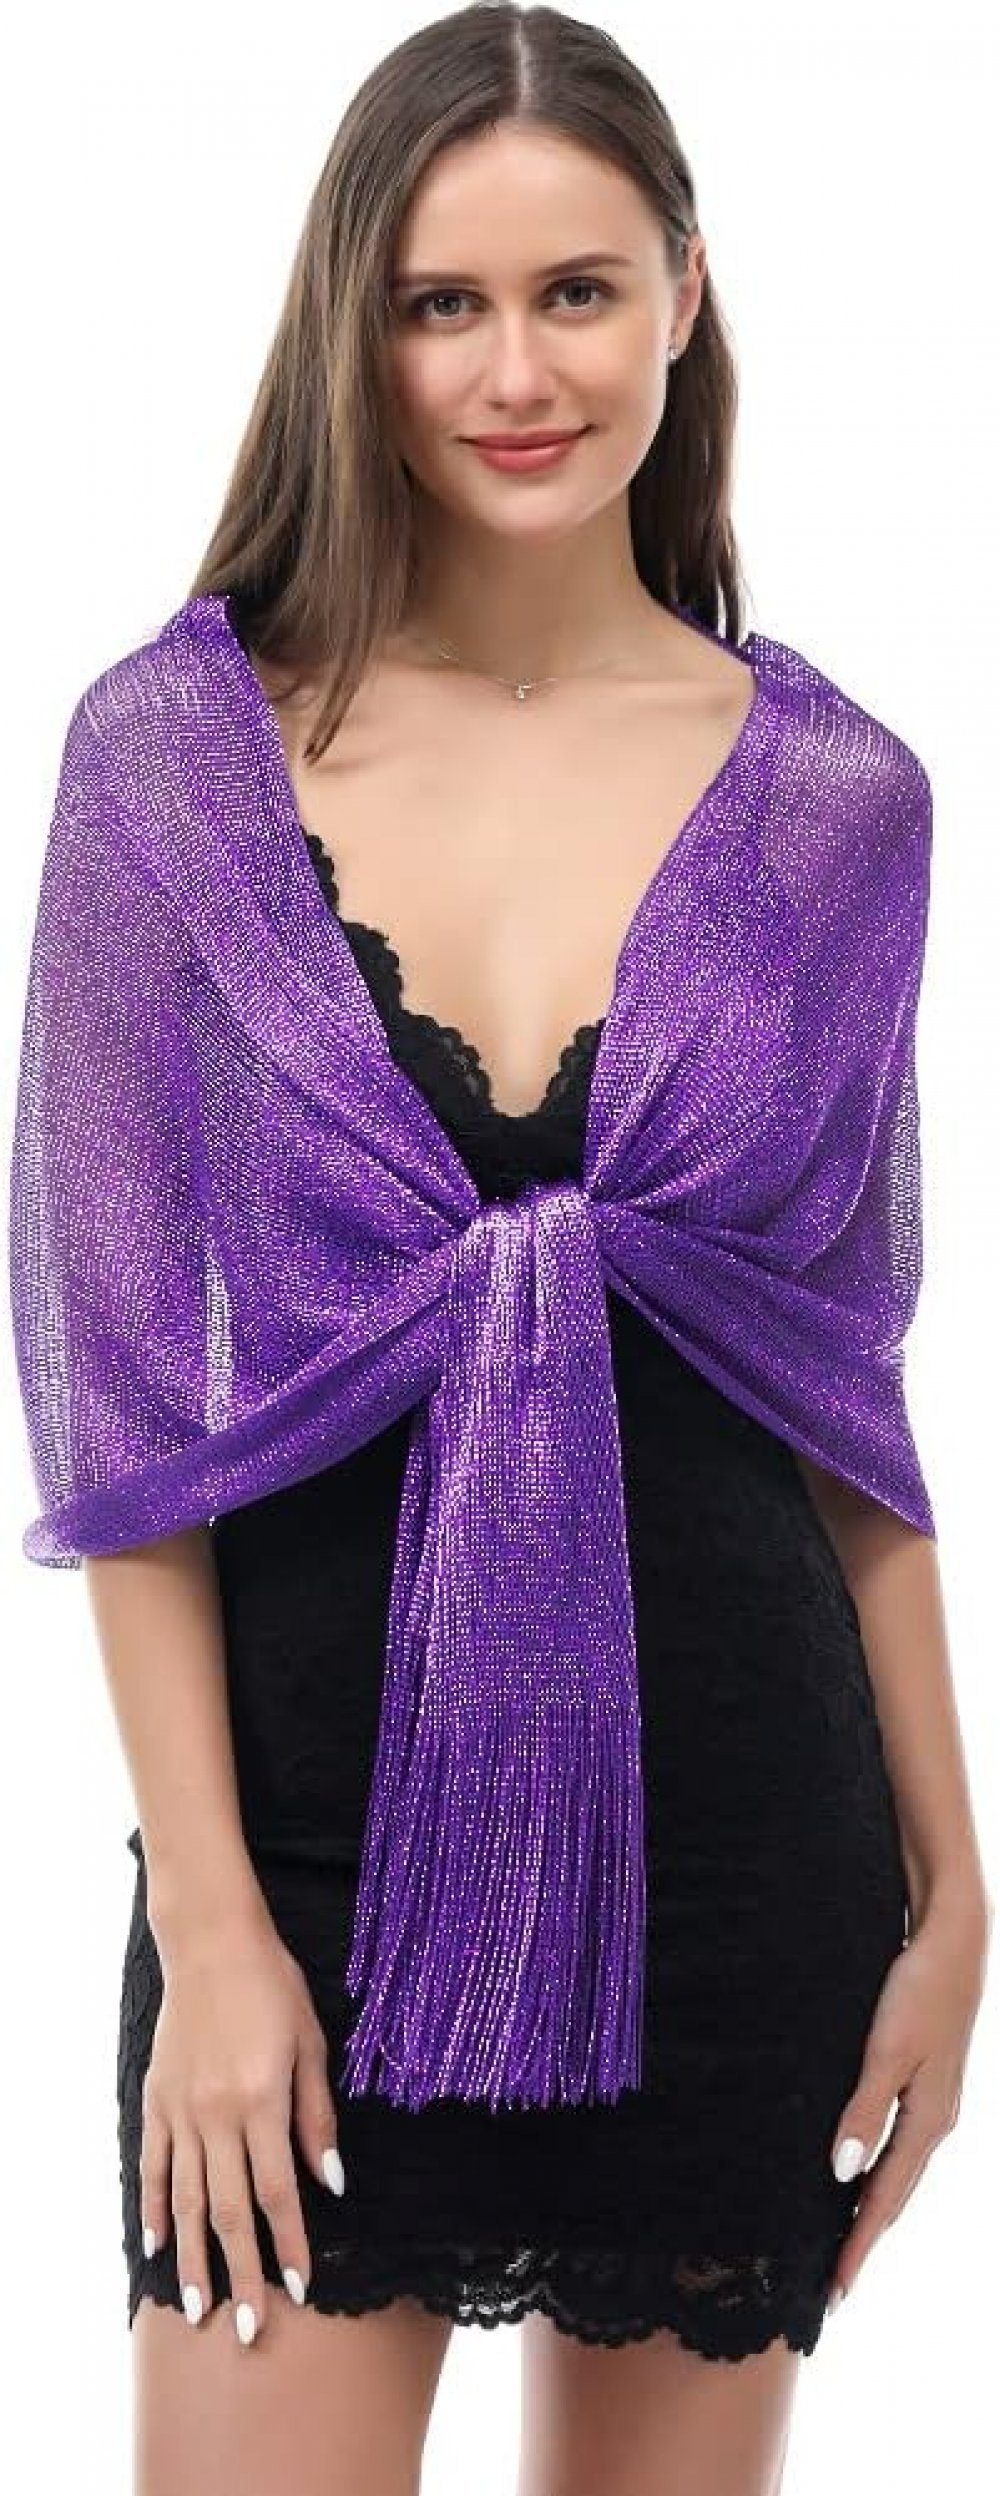 shawl for sparkling WaKuKa Tiefviolett Holiday parties evening Schal suitable metal buckle